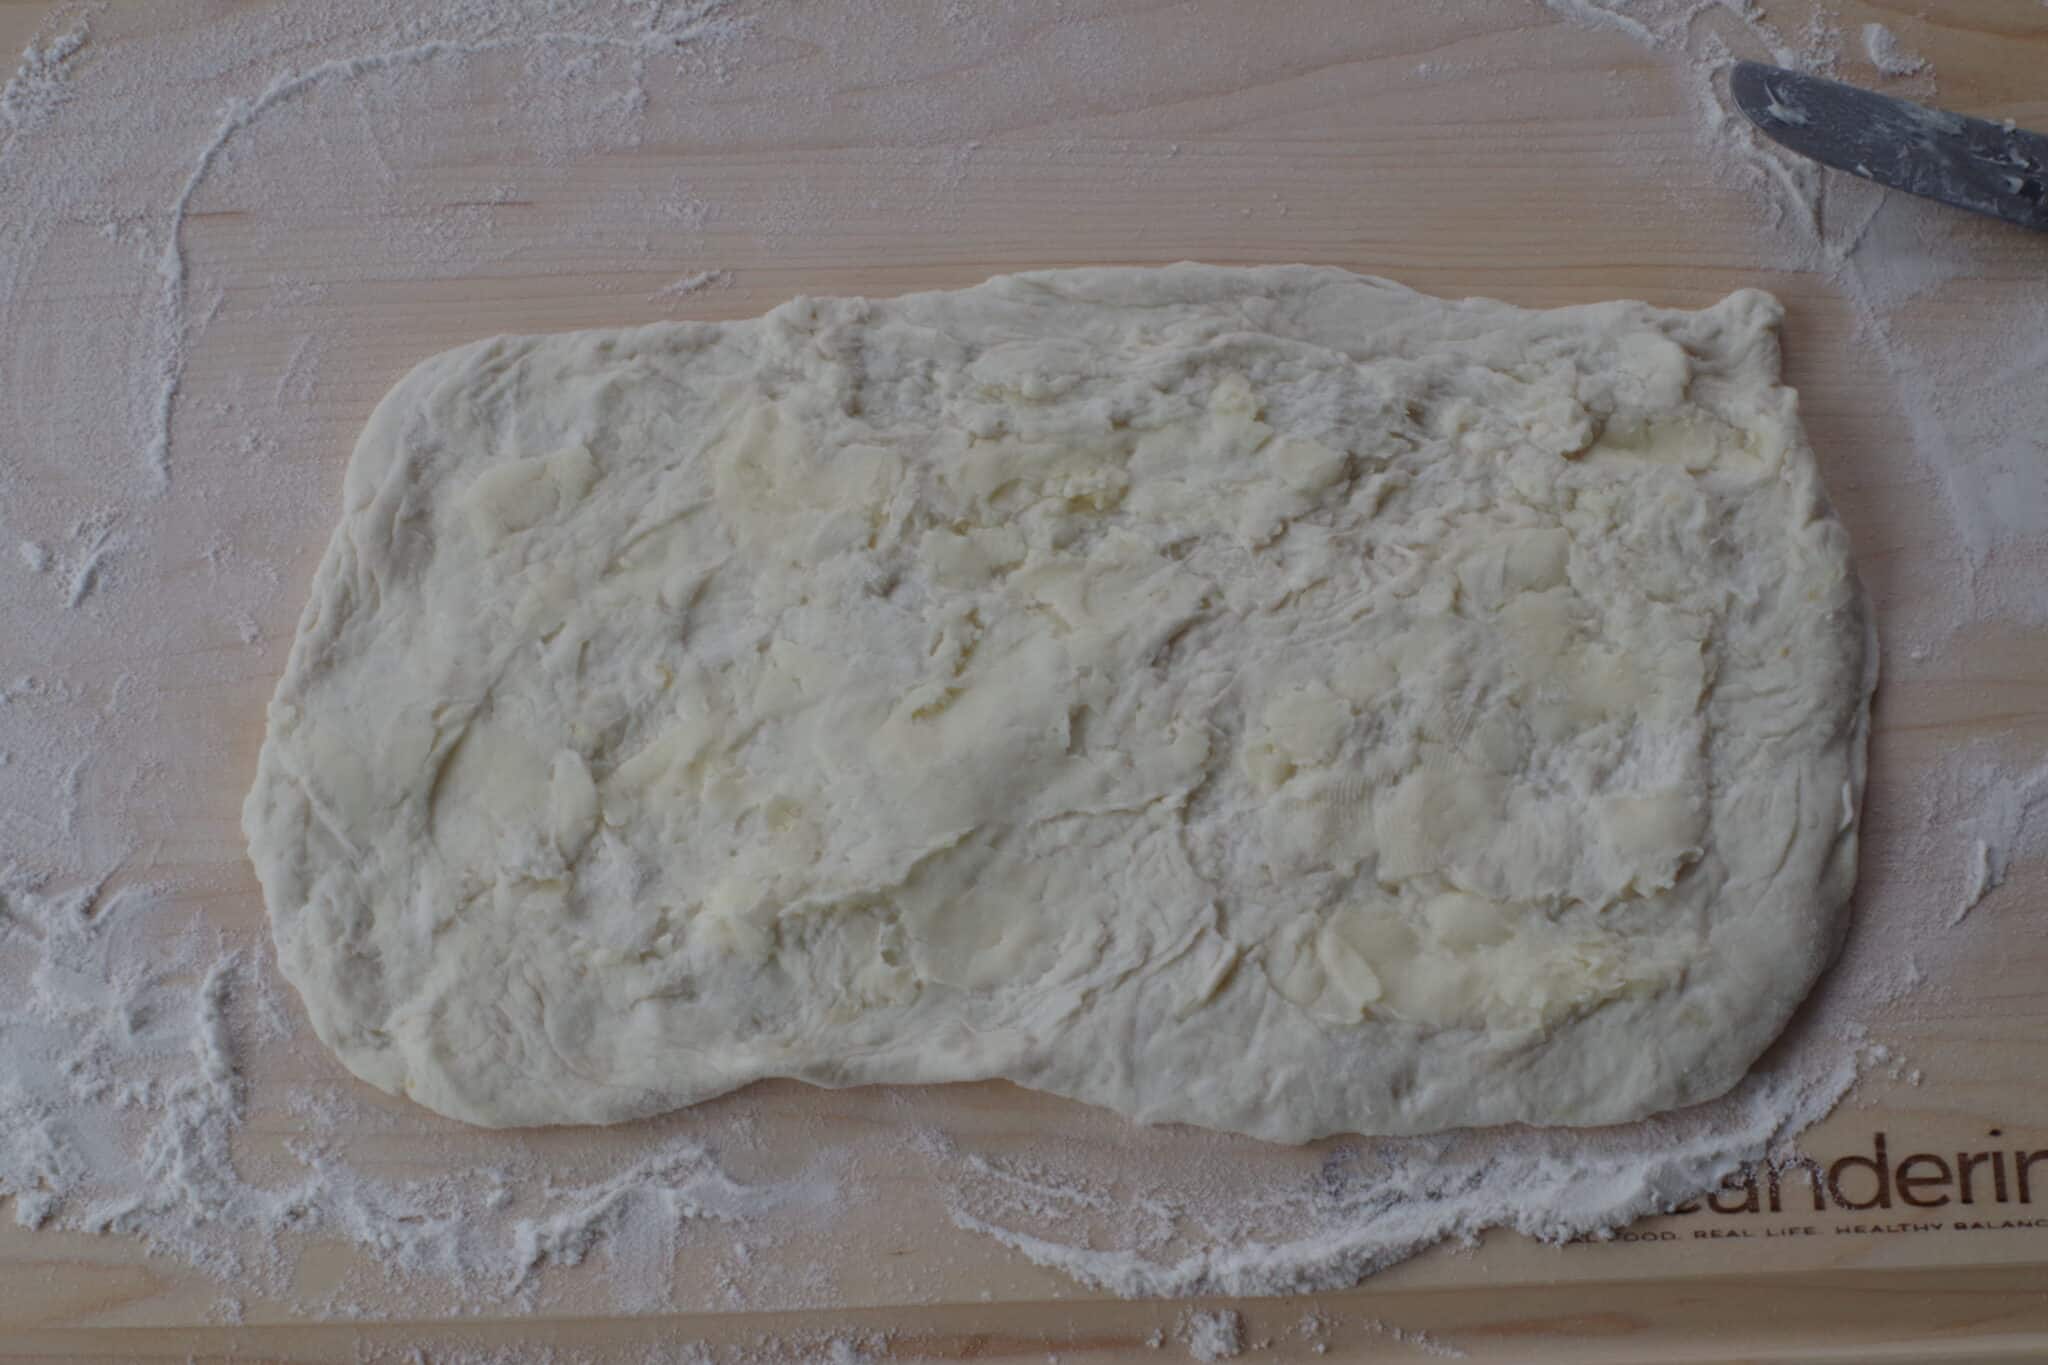 butter spread over the dough rectangle on a wooden cutting board